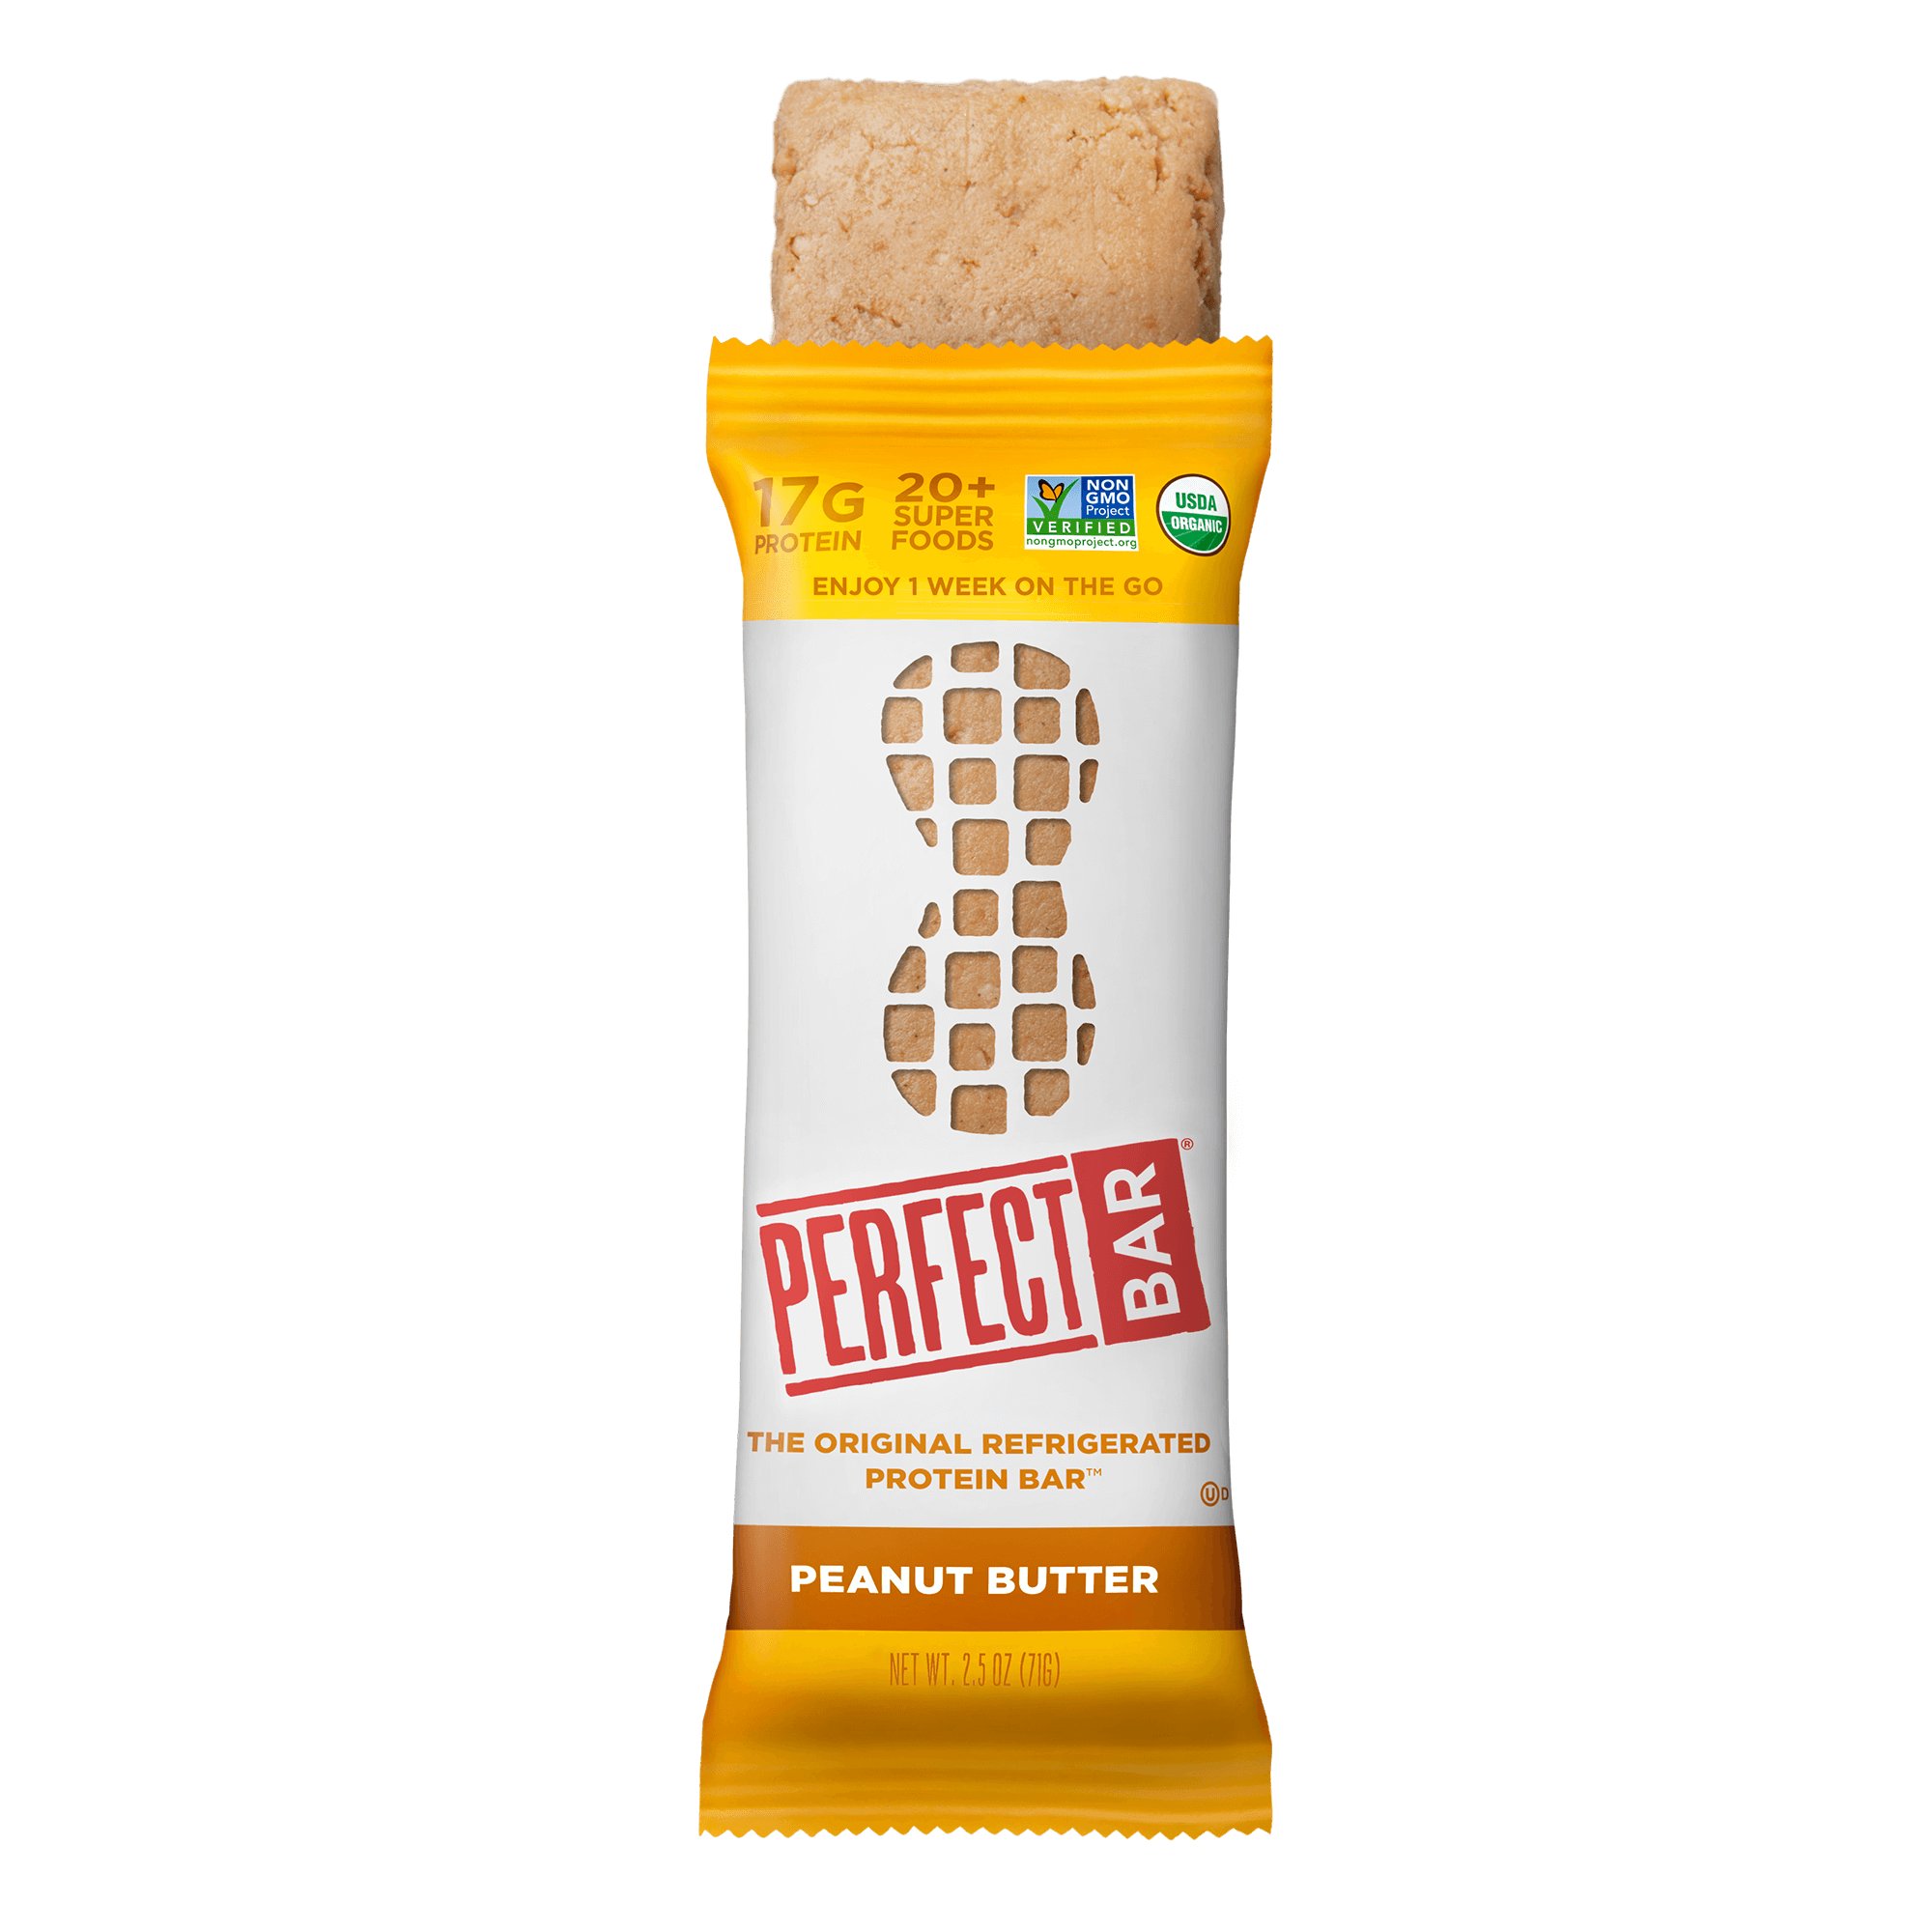 Peanut Butter bar and wrapper